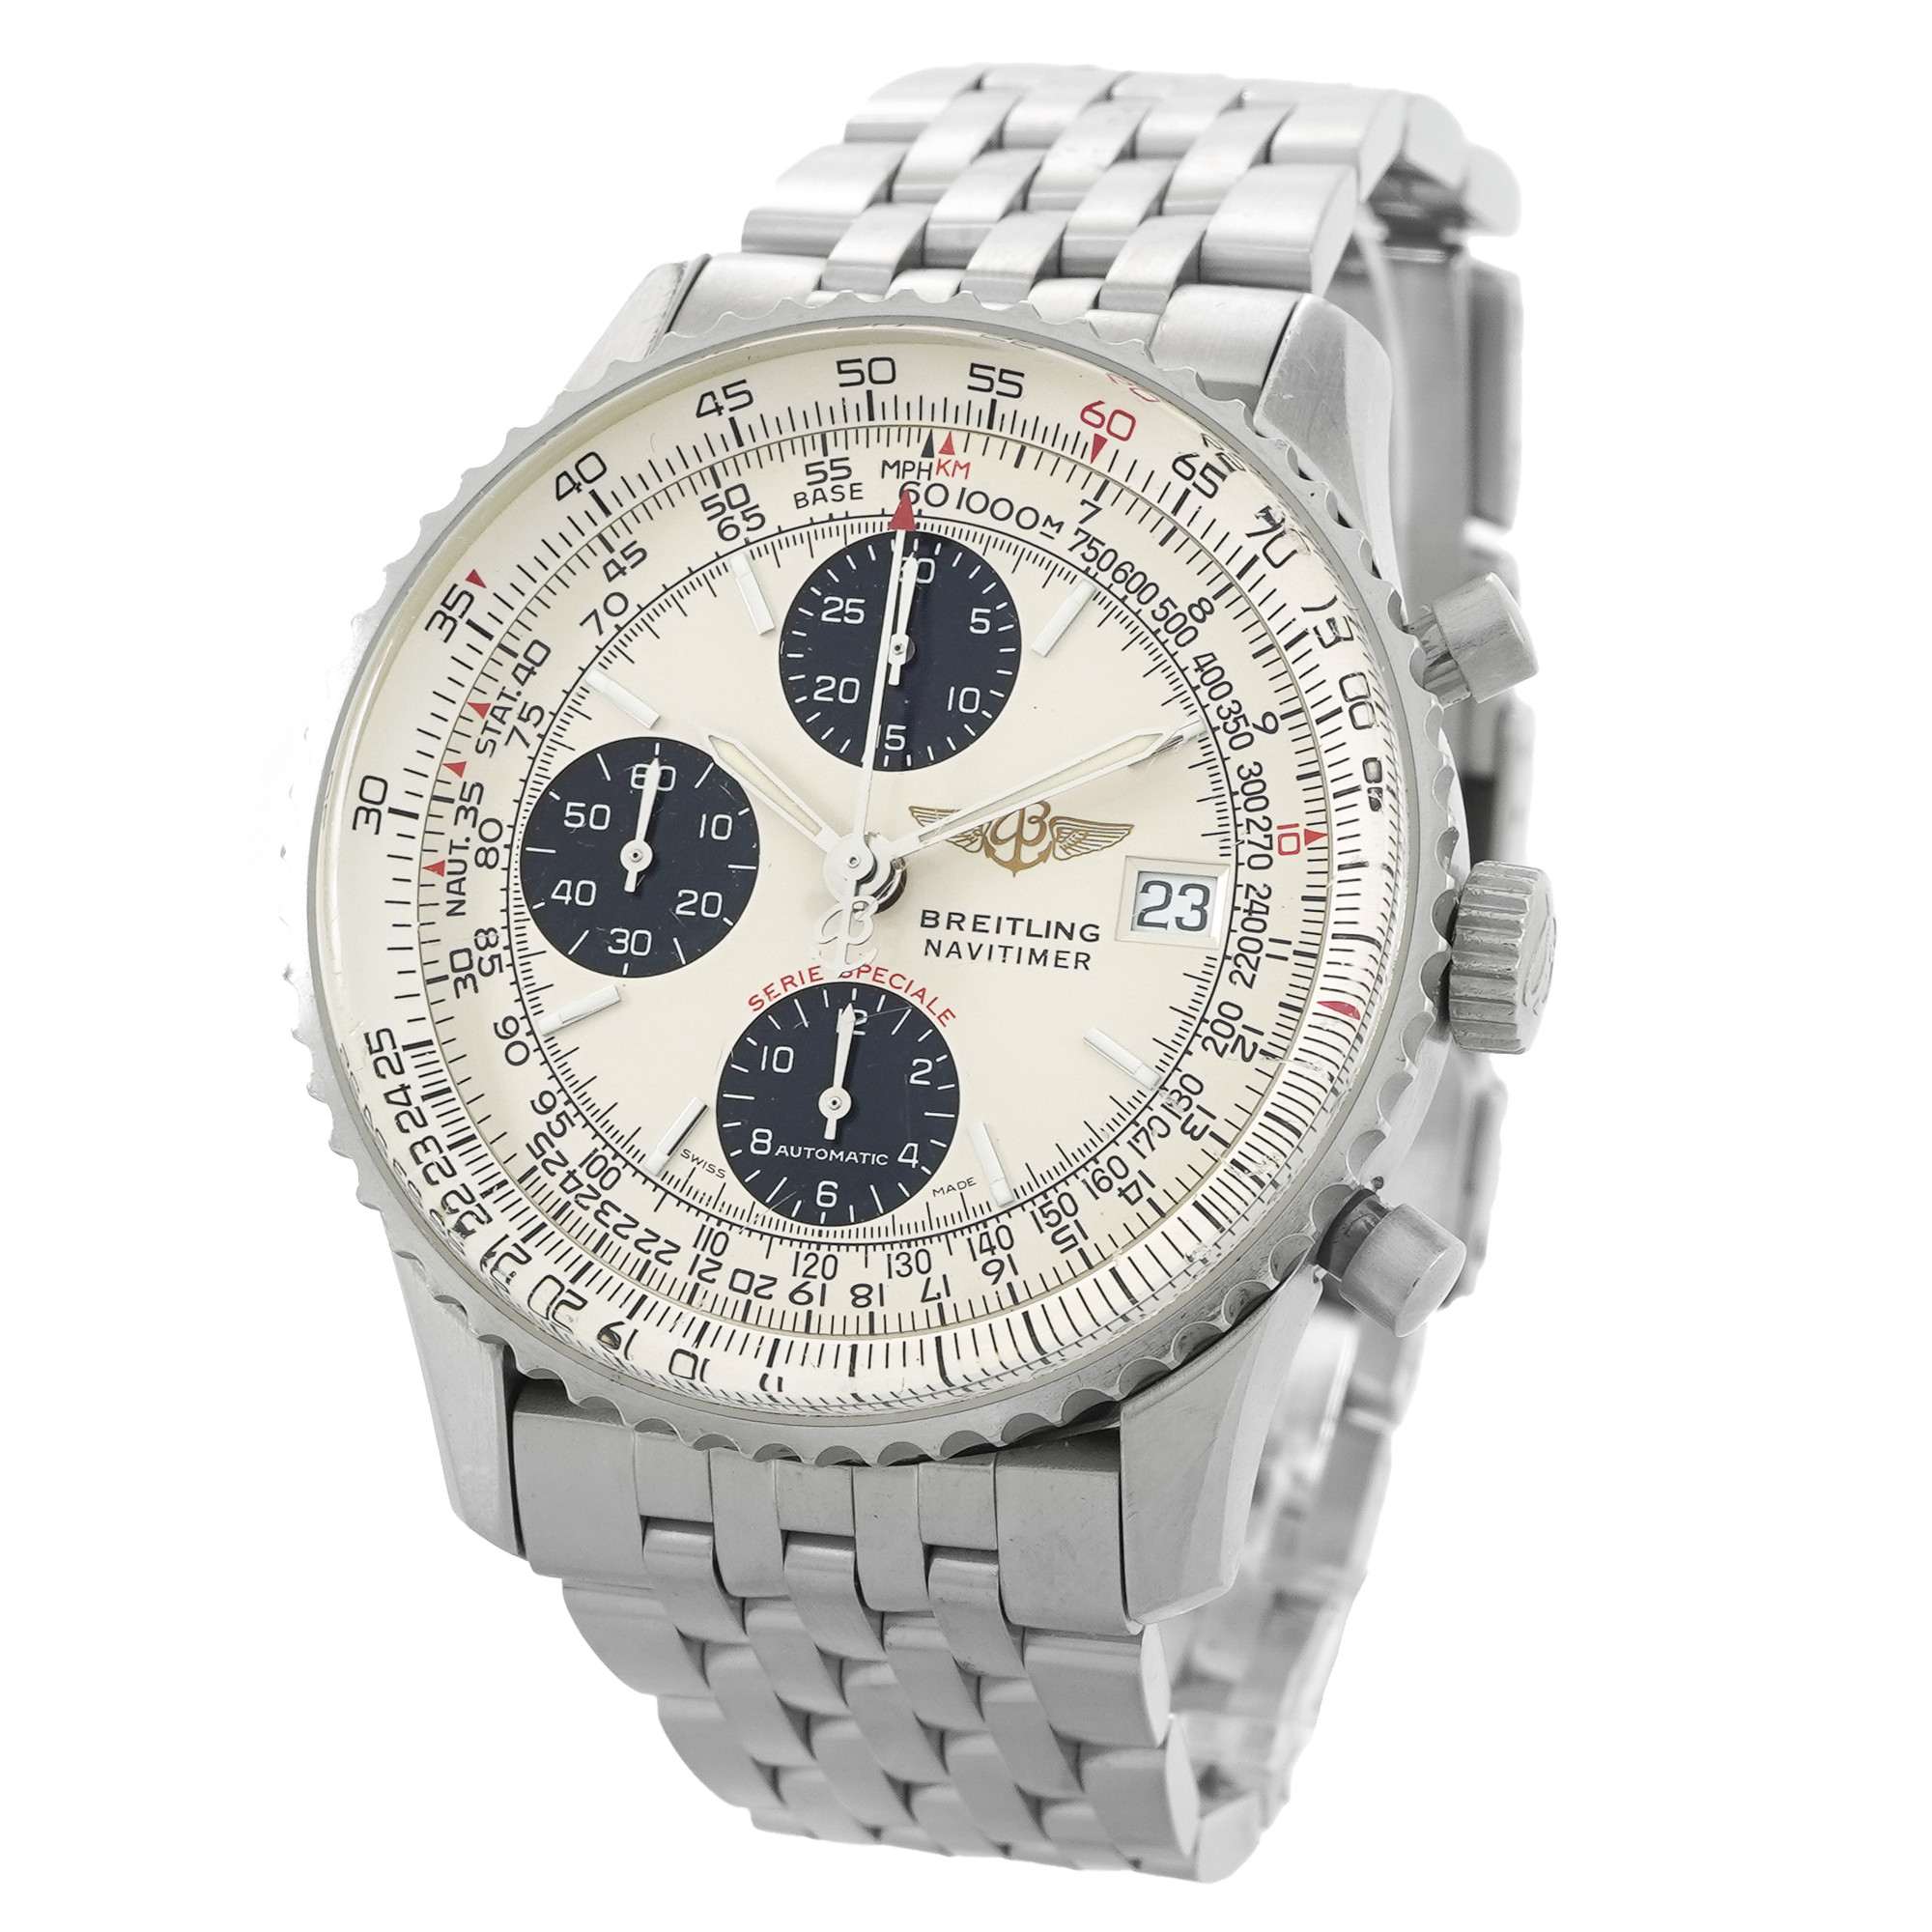 Breitling Navitimer Fighters Chronograph A13330 - Inventory 5565